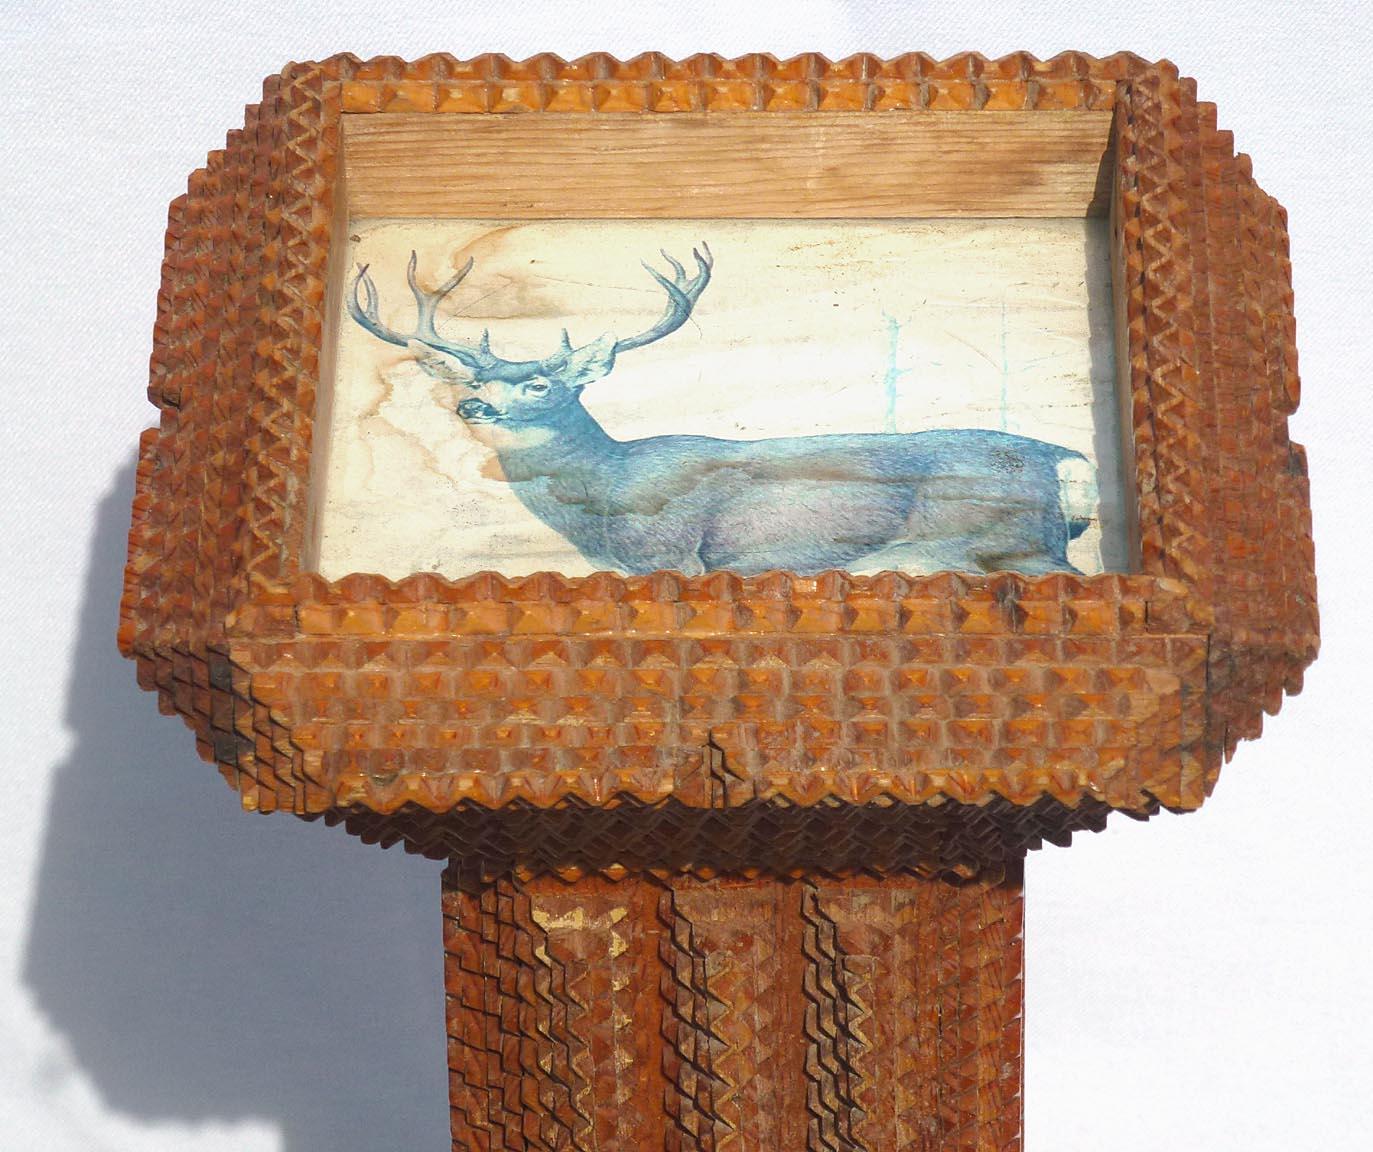 Hand-Carved Tramp Art Pedestal Stand with a Print of a Stag Set under Glass in the Top